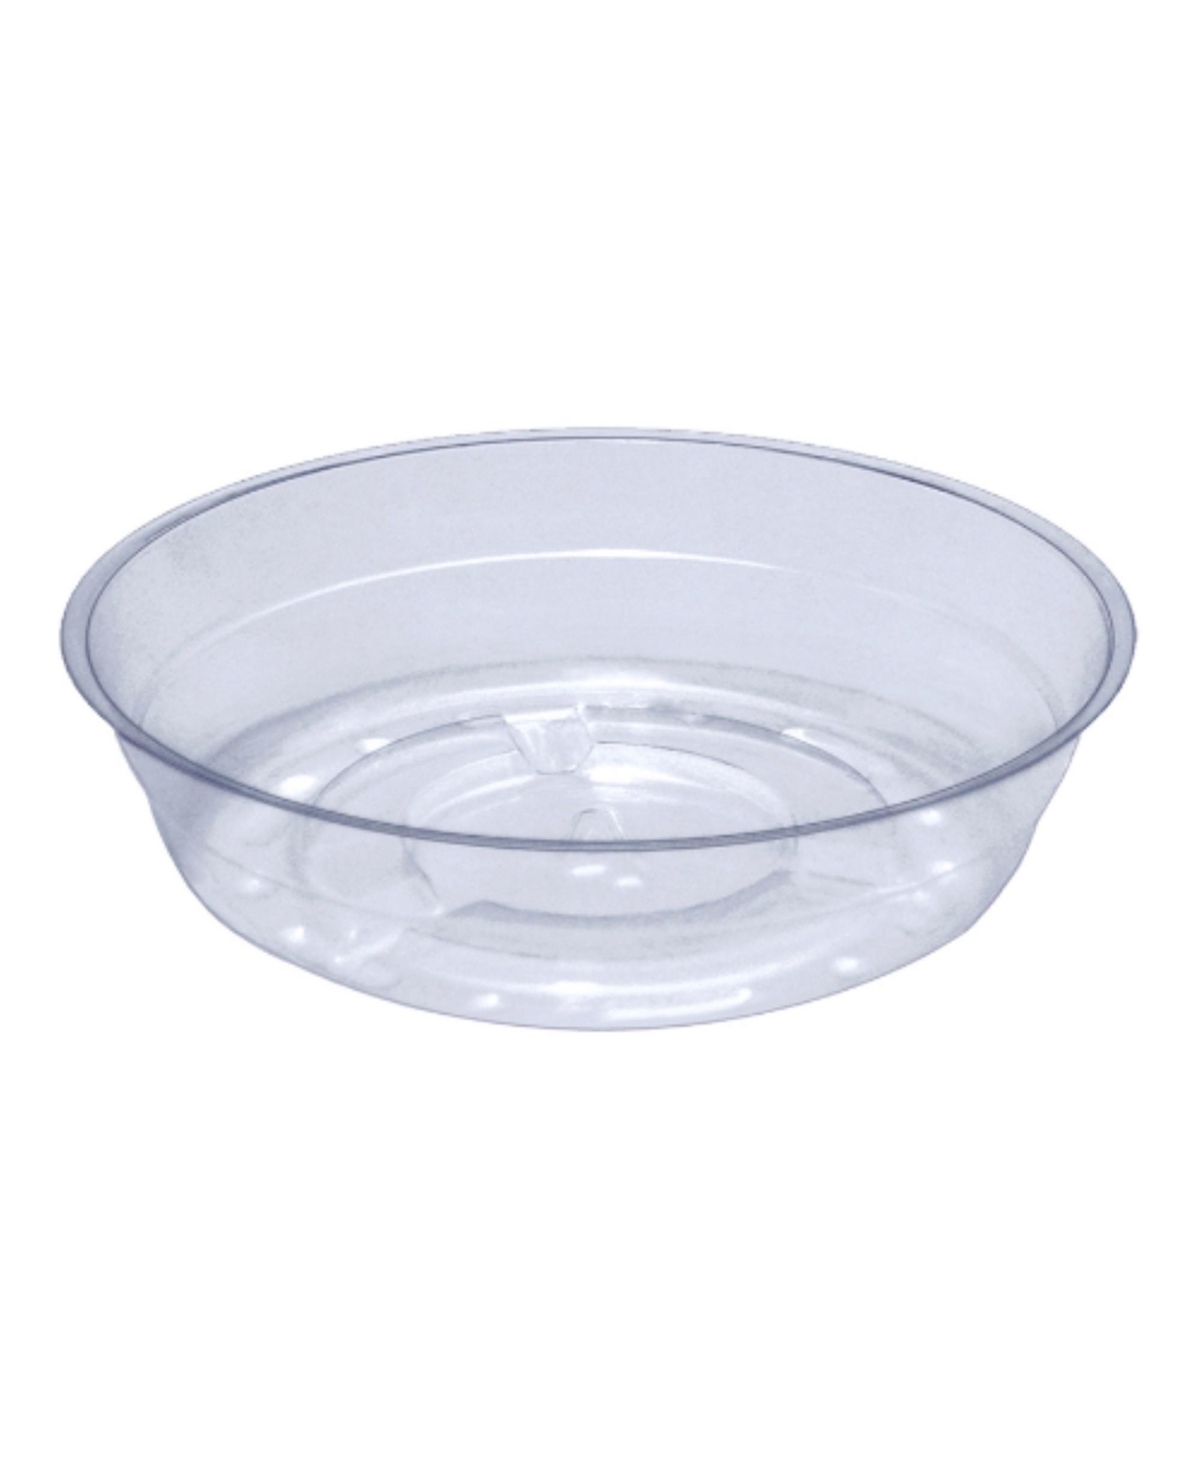 Curtis Wagner Vinyl Planter Pot Saucer, Clear, 4in Pack of 1 - Clear